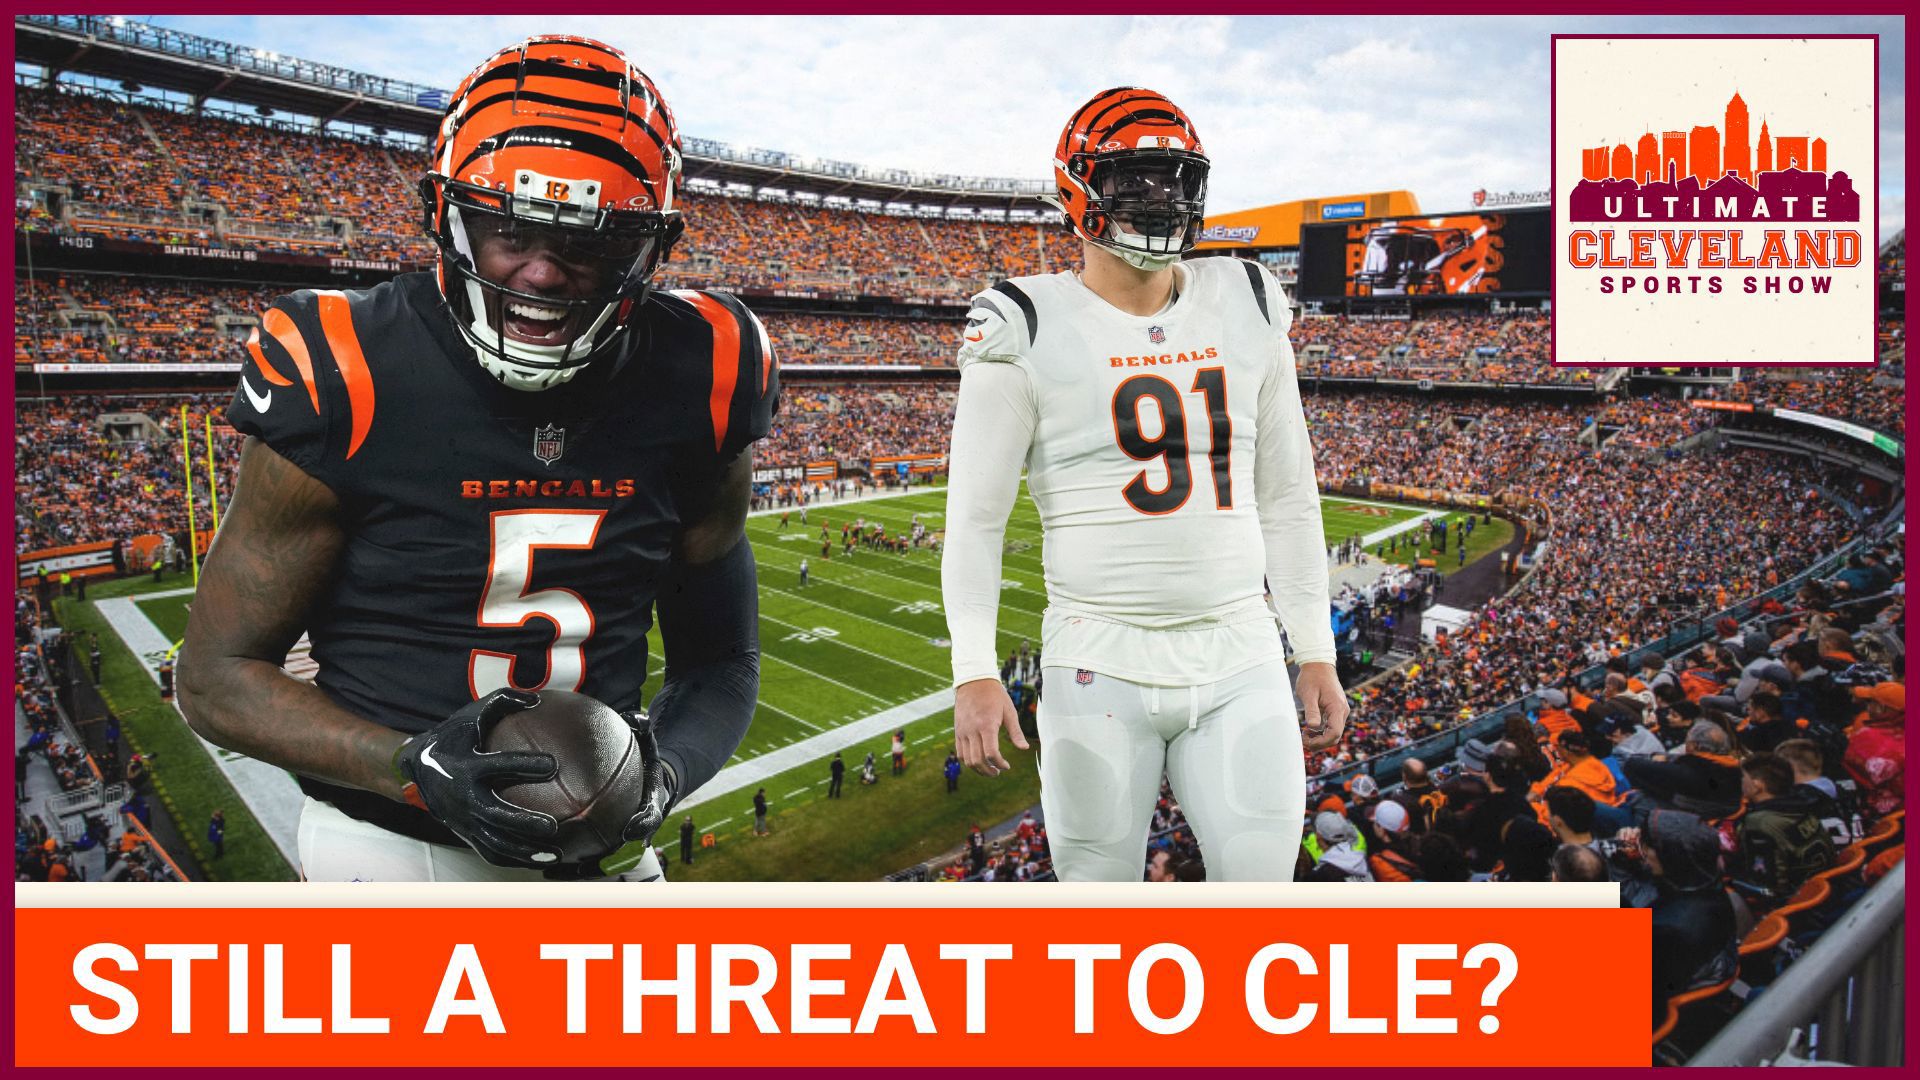 UCSS have the discussion about the Cincinnati Bengals still being a threat to the Cleveland Browns